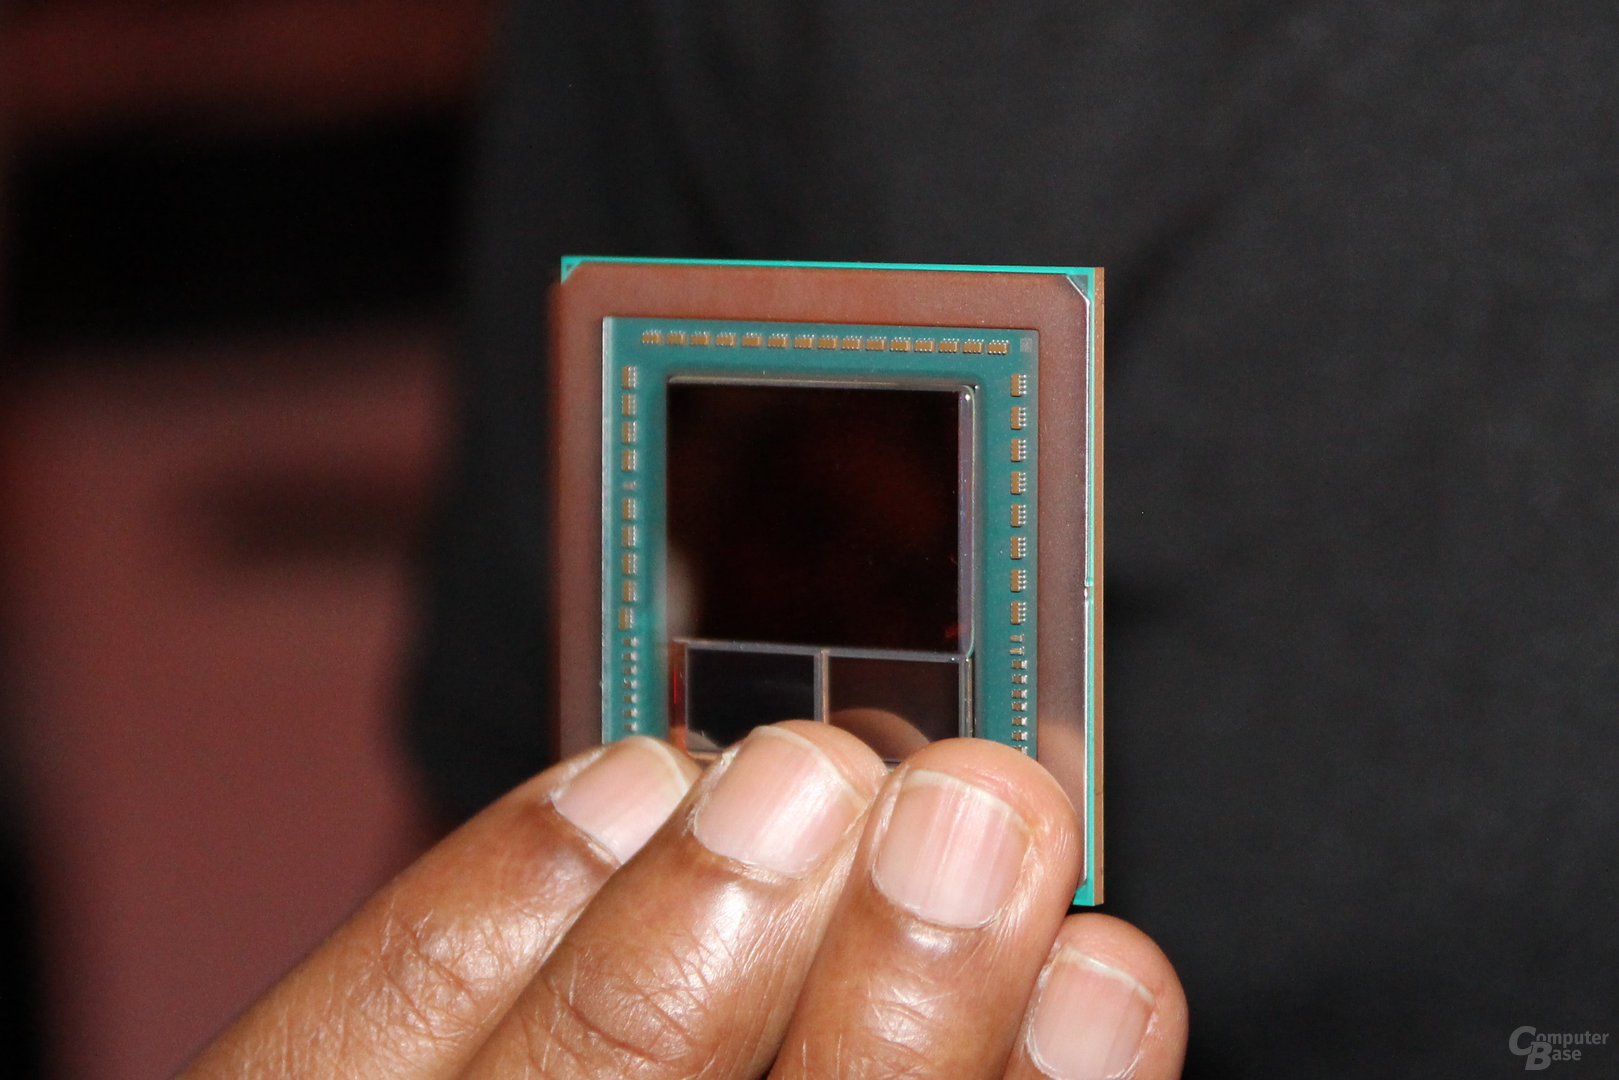 AMD VEGA GPU pictured, features two HBM2 stacks